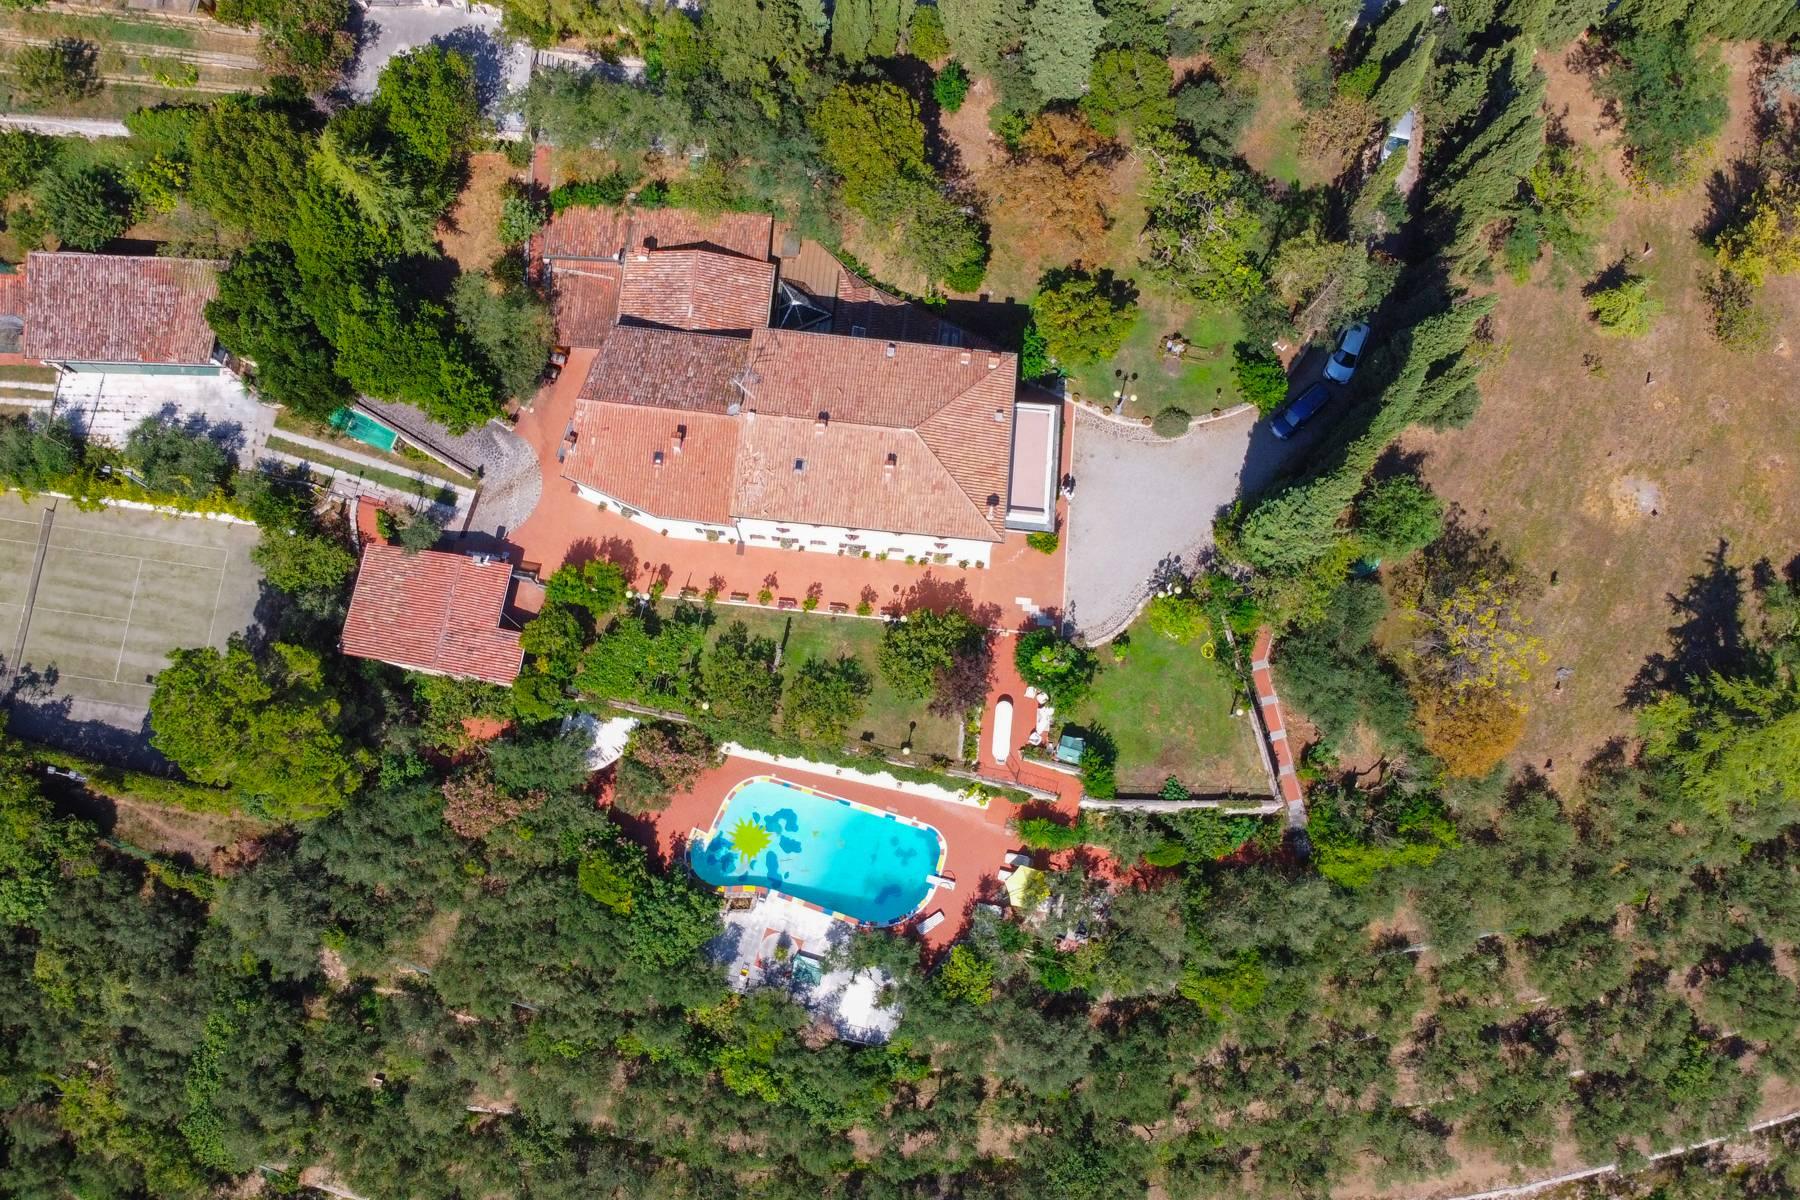 Historic country villa with swimming pool, tennis court and estate on the hills of Verona - 27